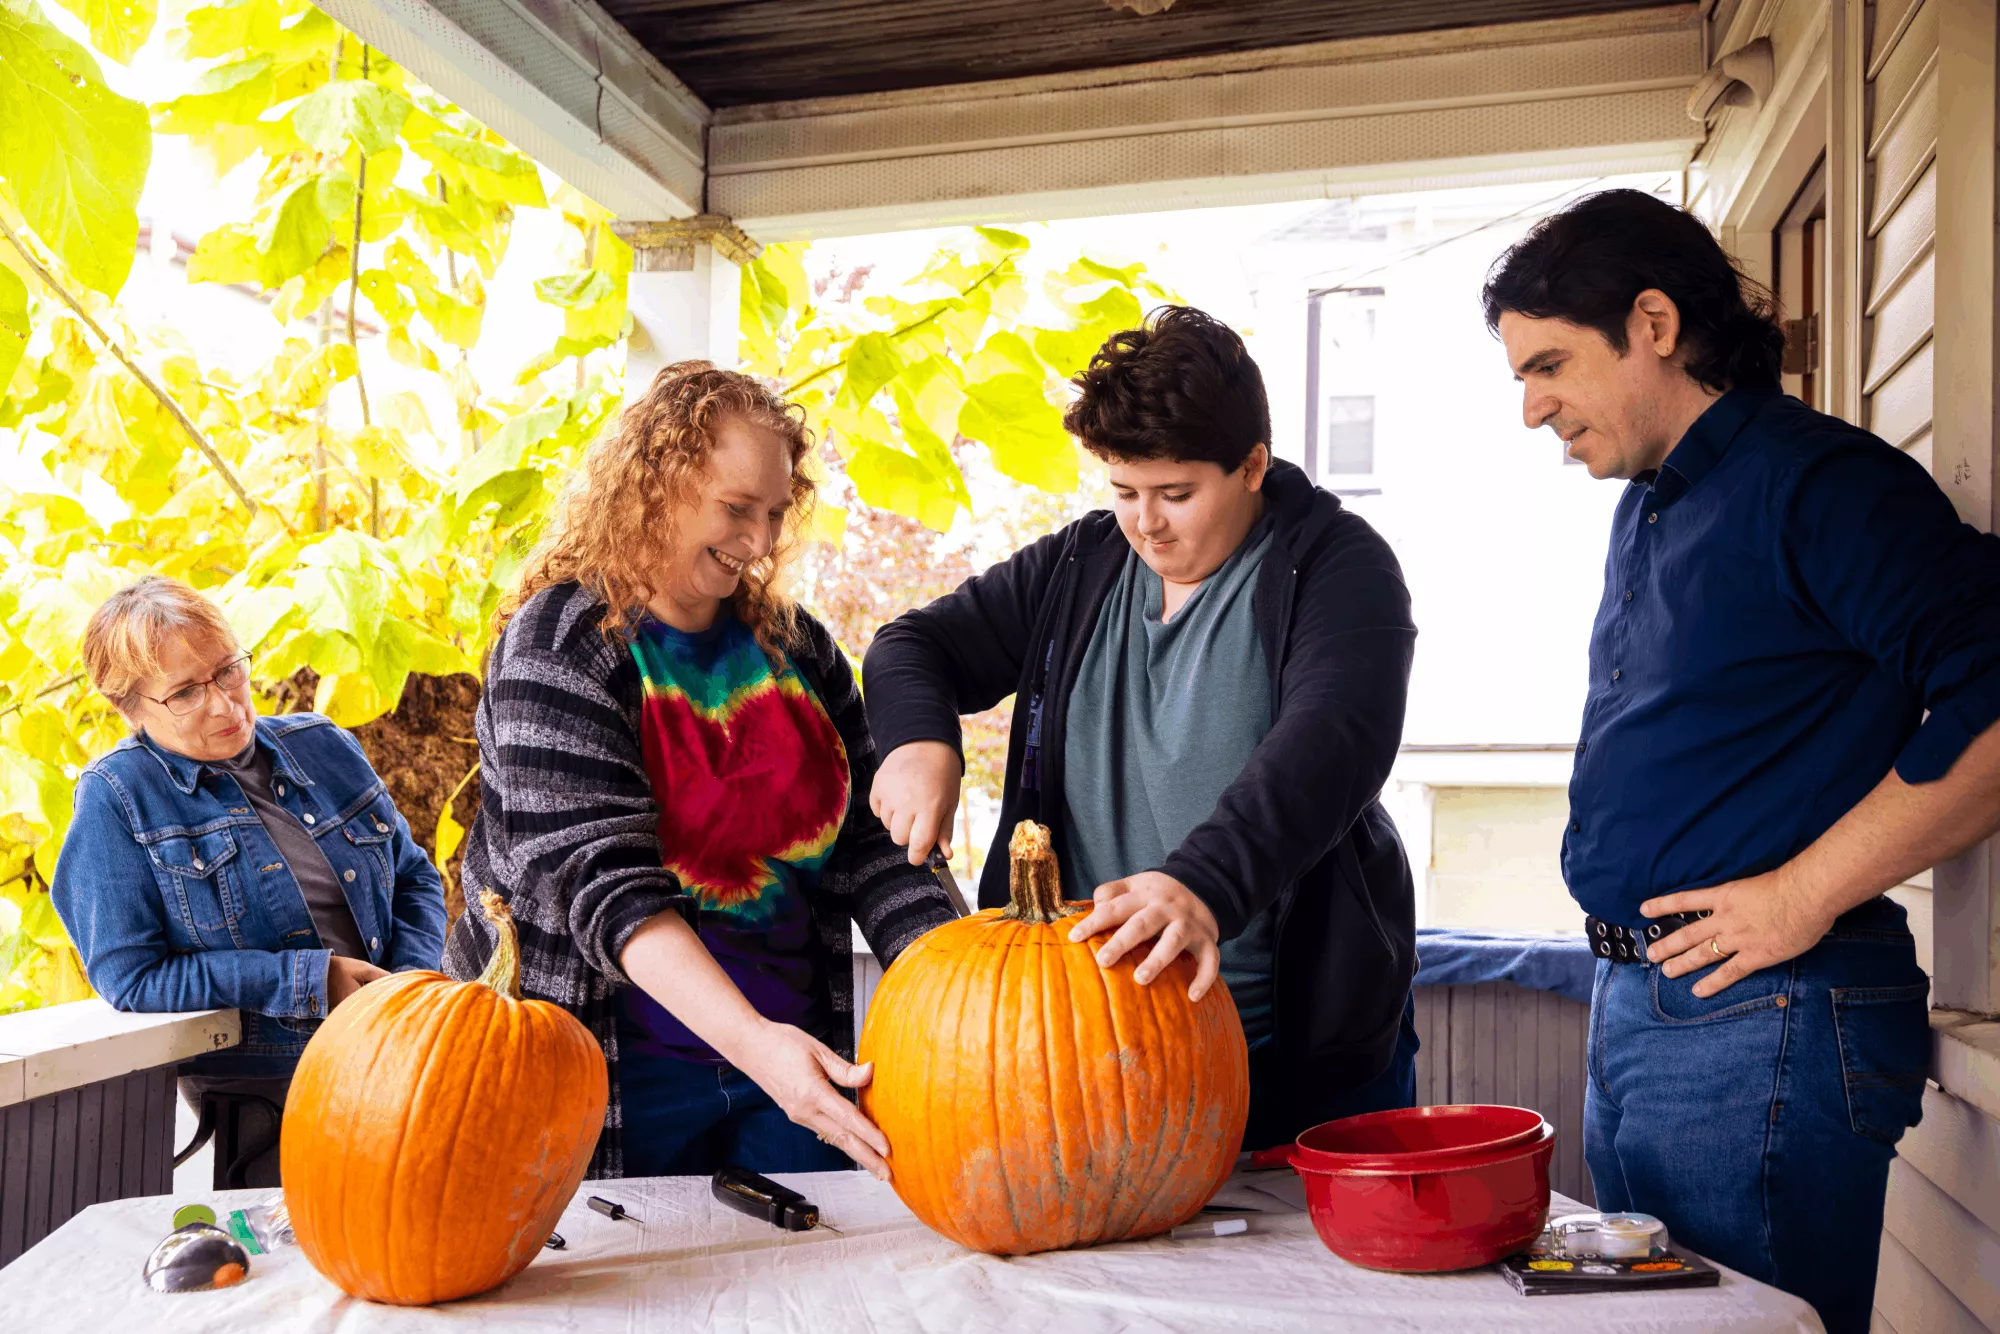 Laurie carves Halloween pumpkins with her family